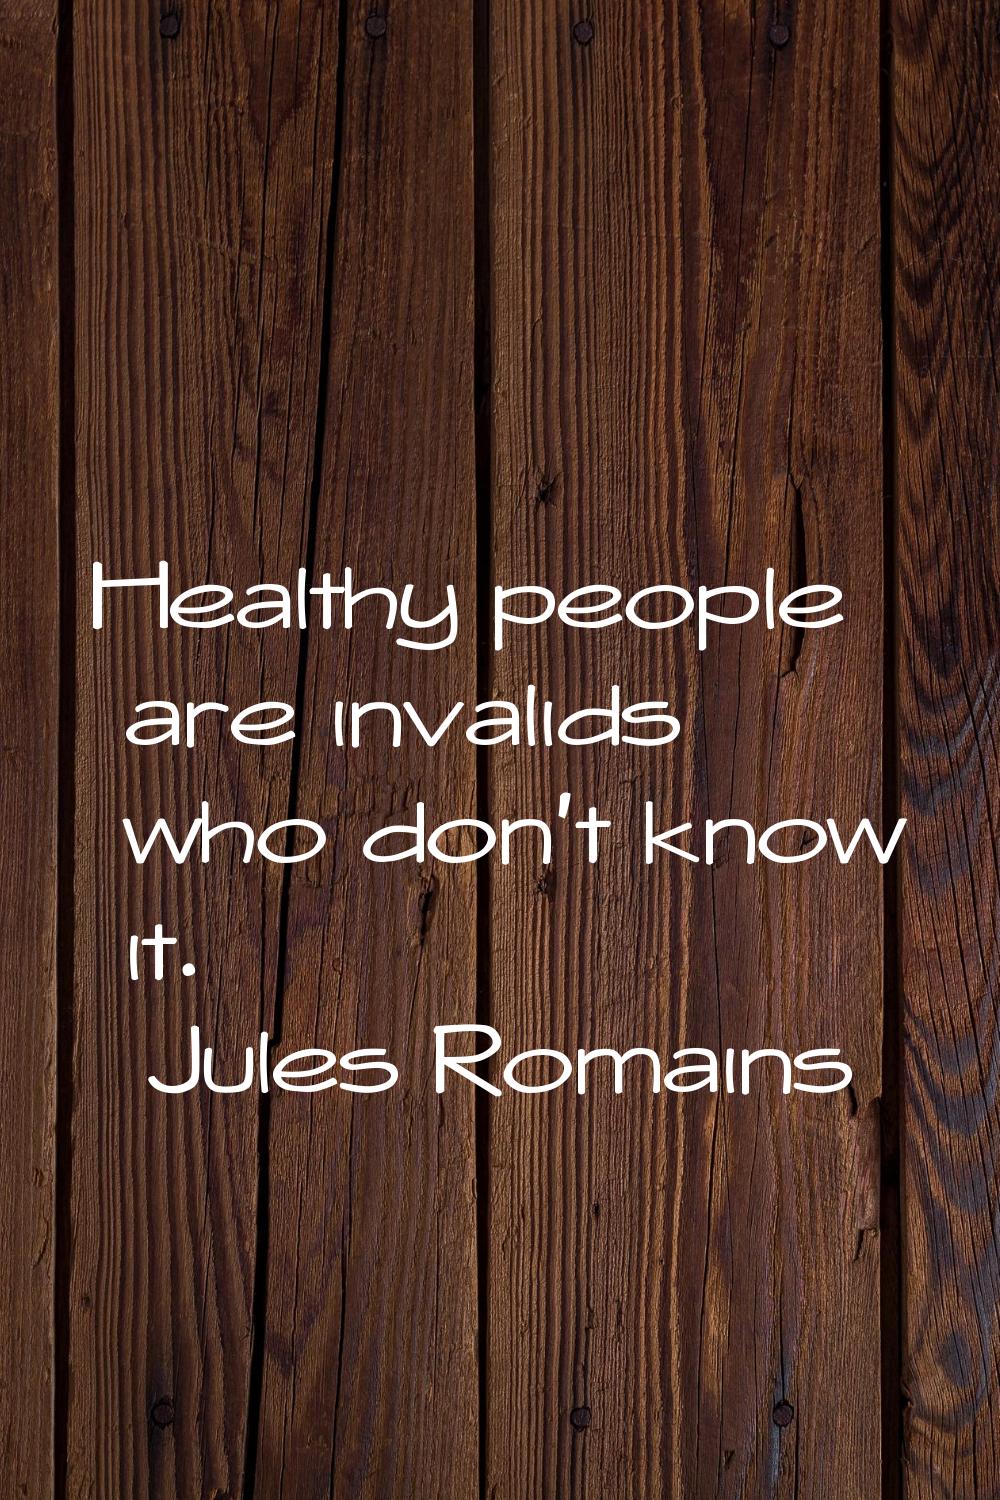 Healthy people are invalids who don't know it.